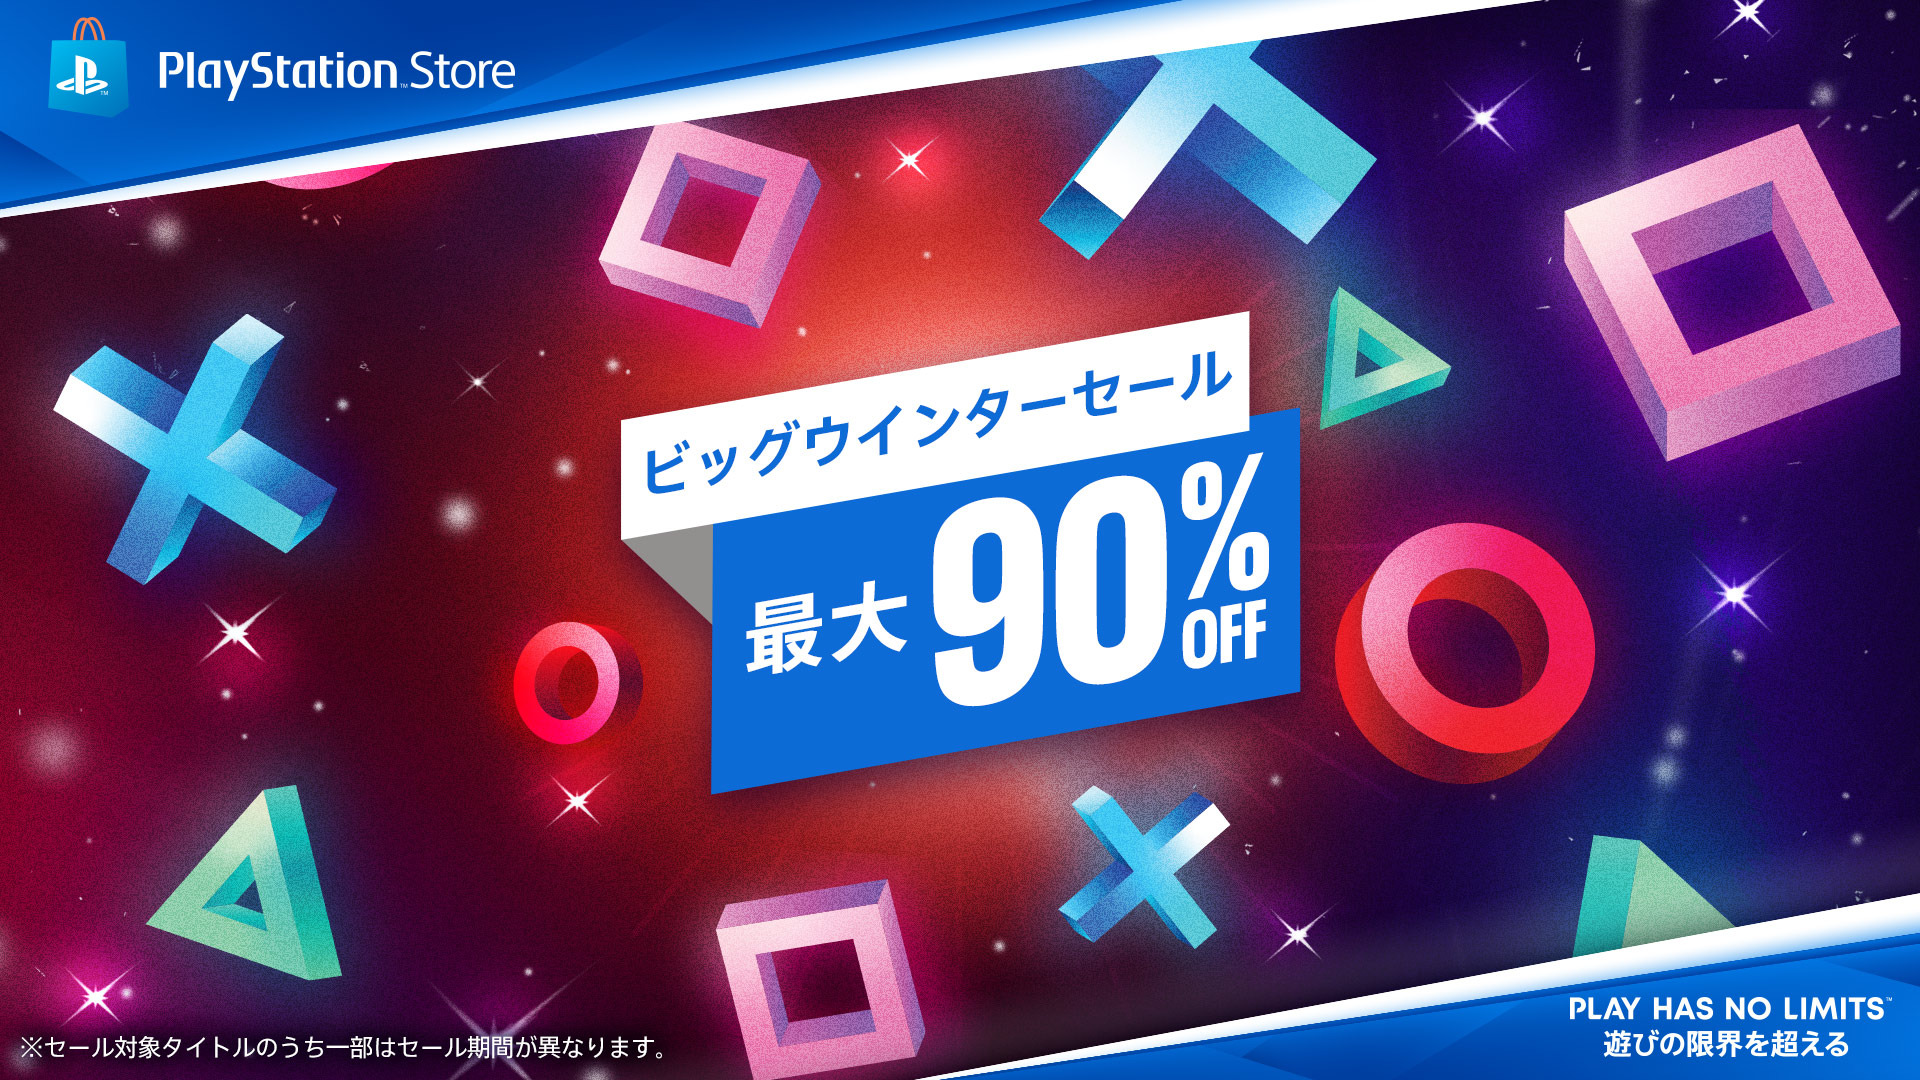 Ps Store ビッグウインターセール 開催 Game Spark 国内 海外ゲーム情報サイト